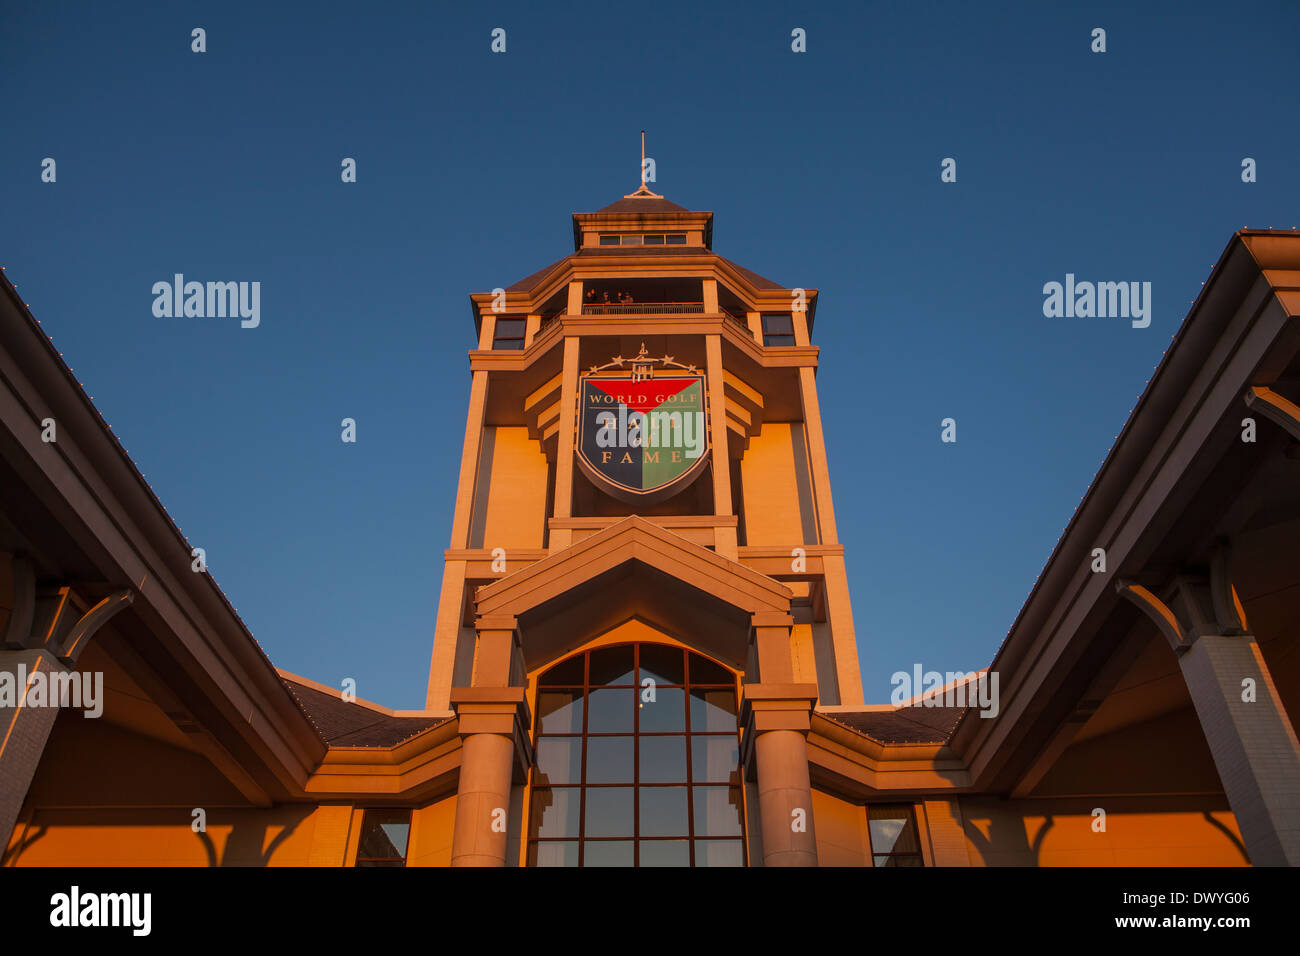 World golf hall of fame imax theater saint augustine fl World Golf Hall Of Fame High Resolution Stock Photography And Images Alamy